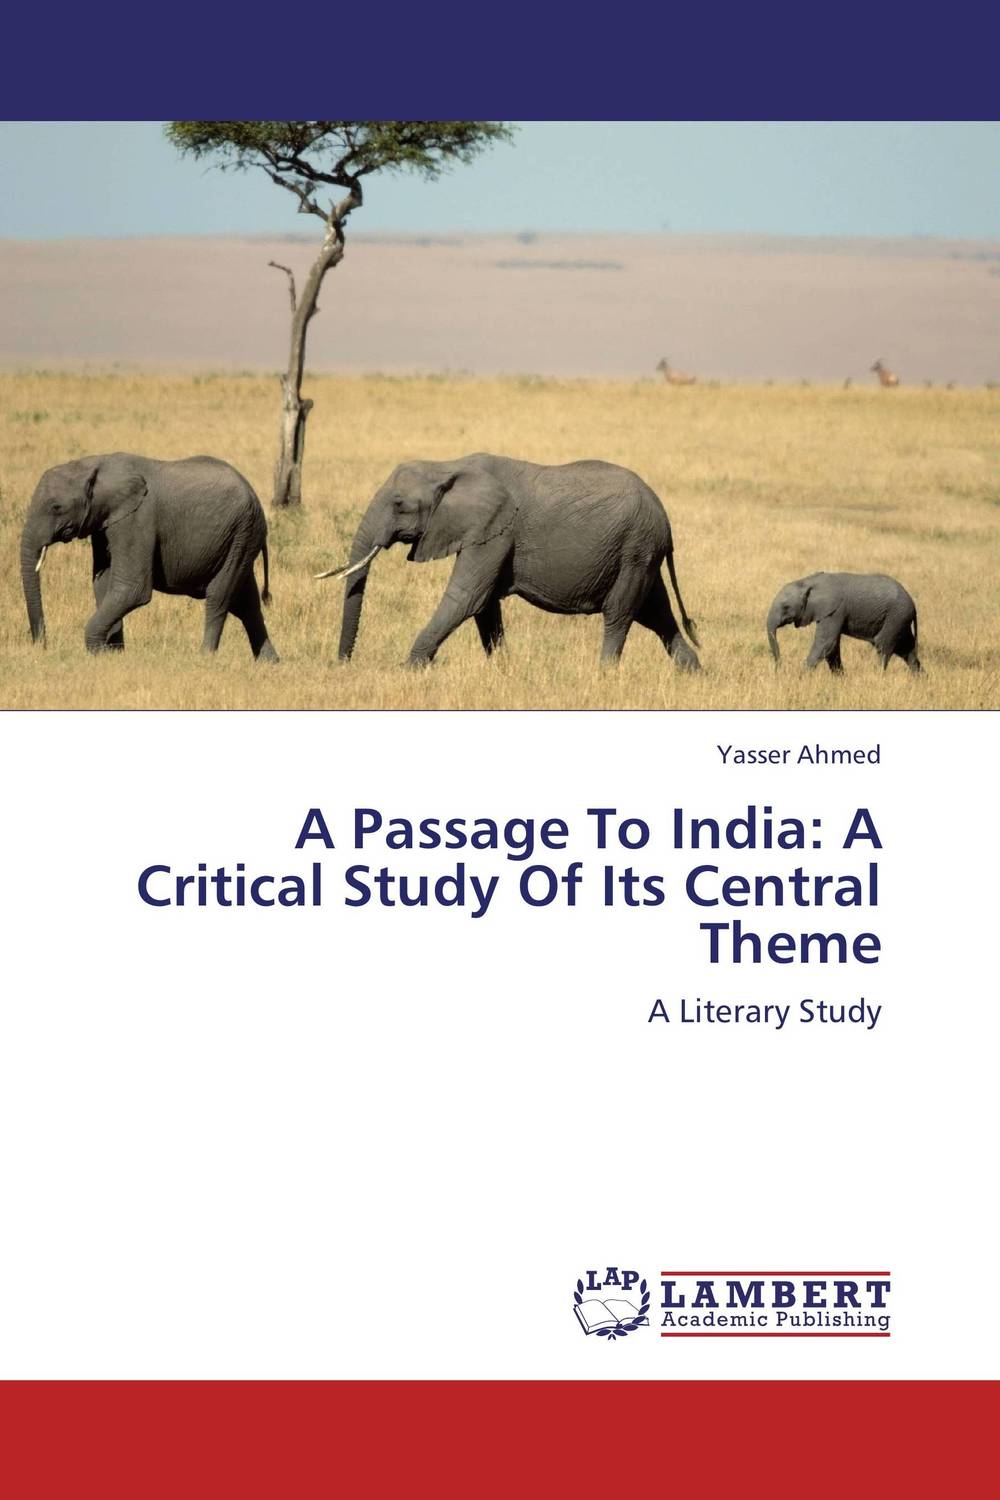 A Passage To India: A Critical Study Of Its Central Theme